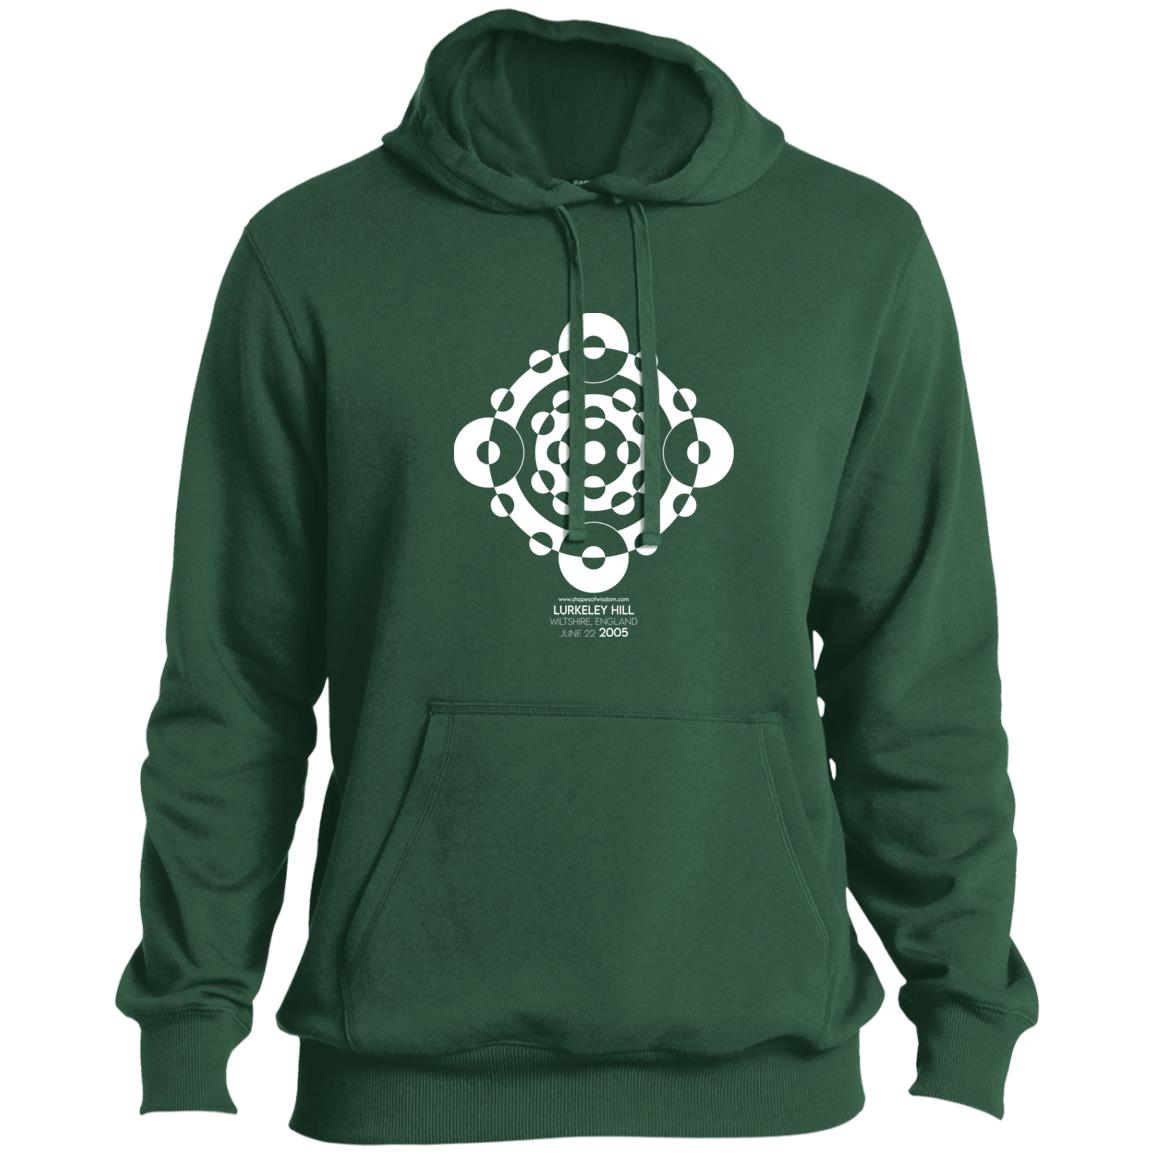 Crop Circle Pullover Hoodie - Lurkeley Hill 2